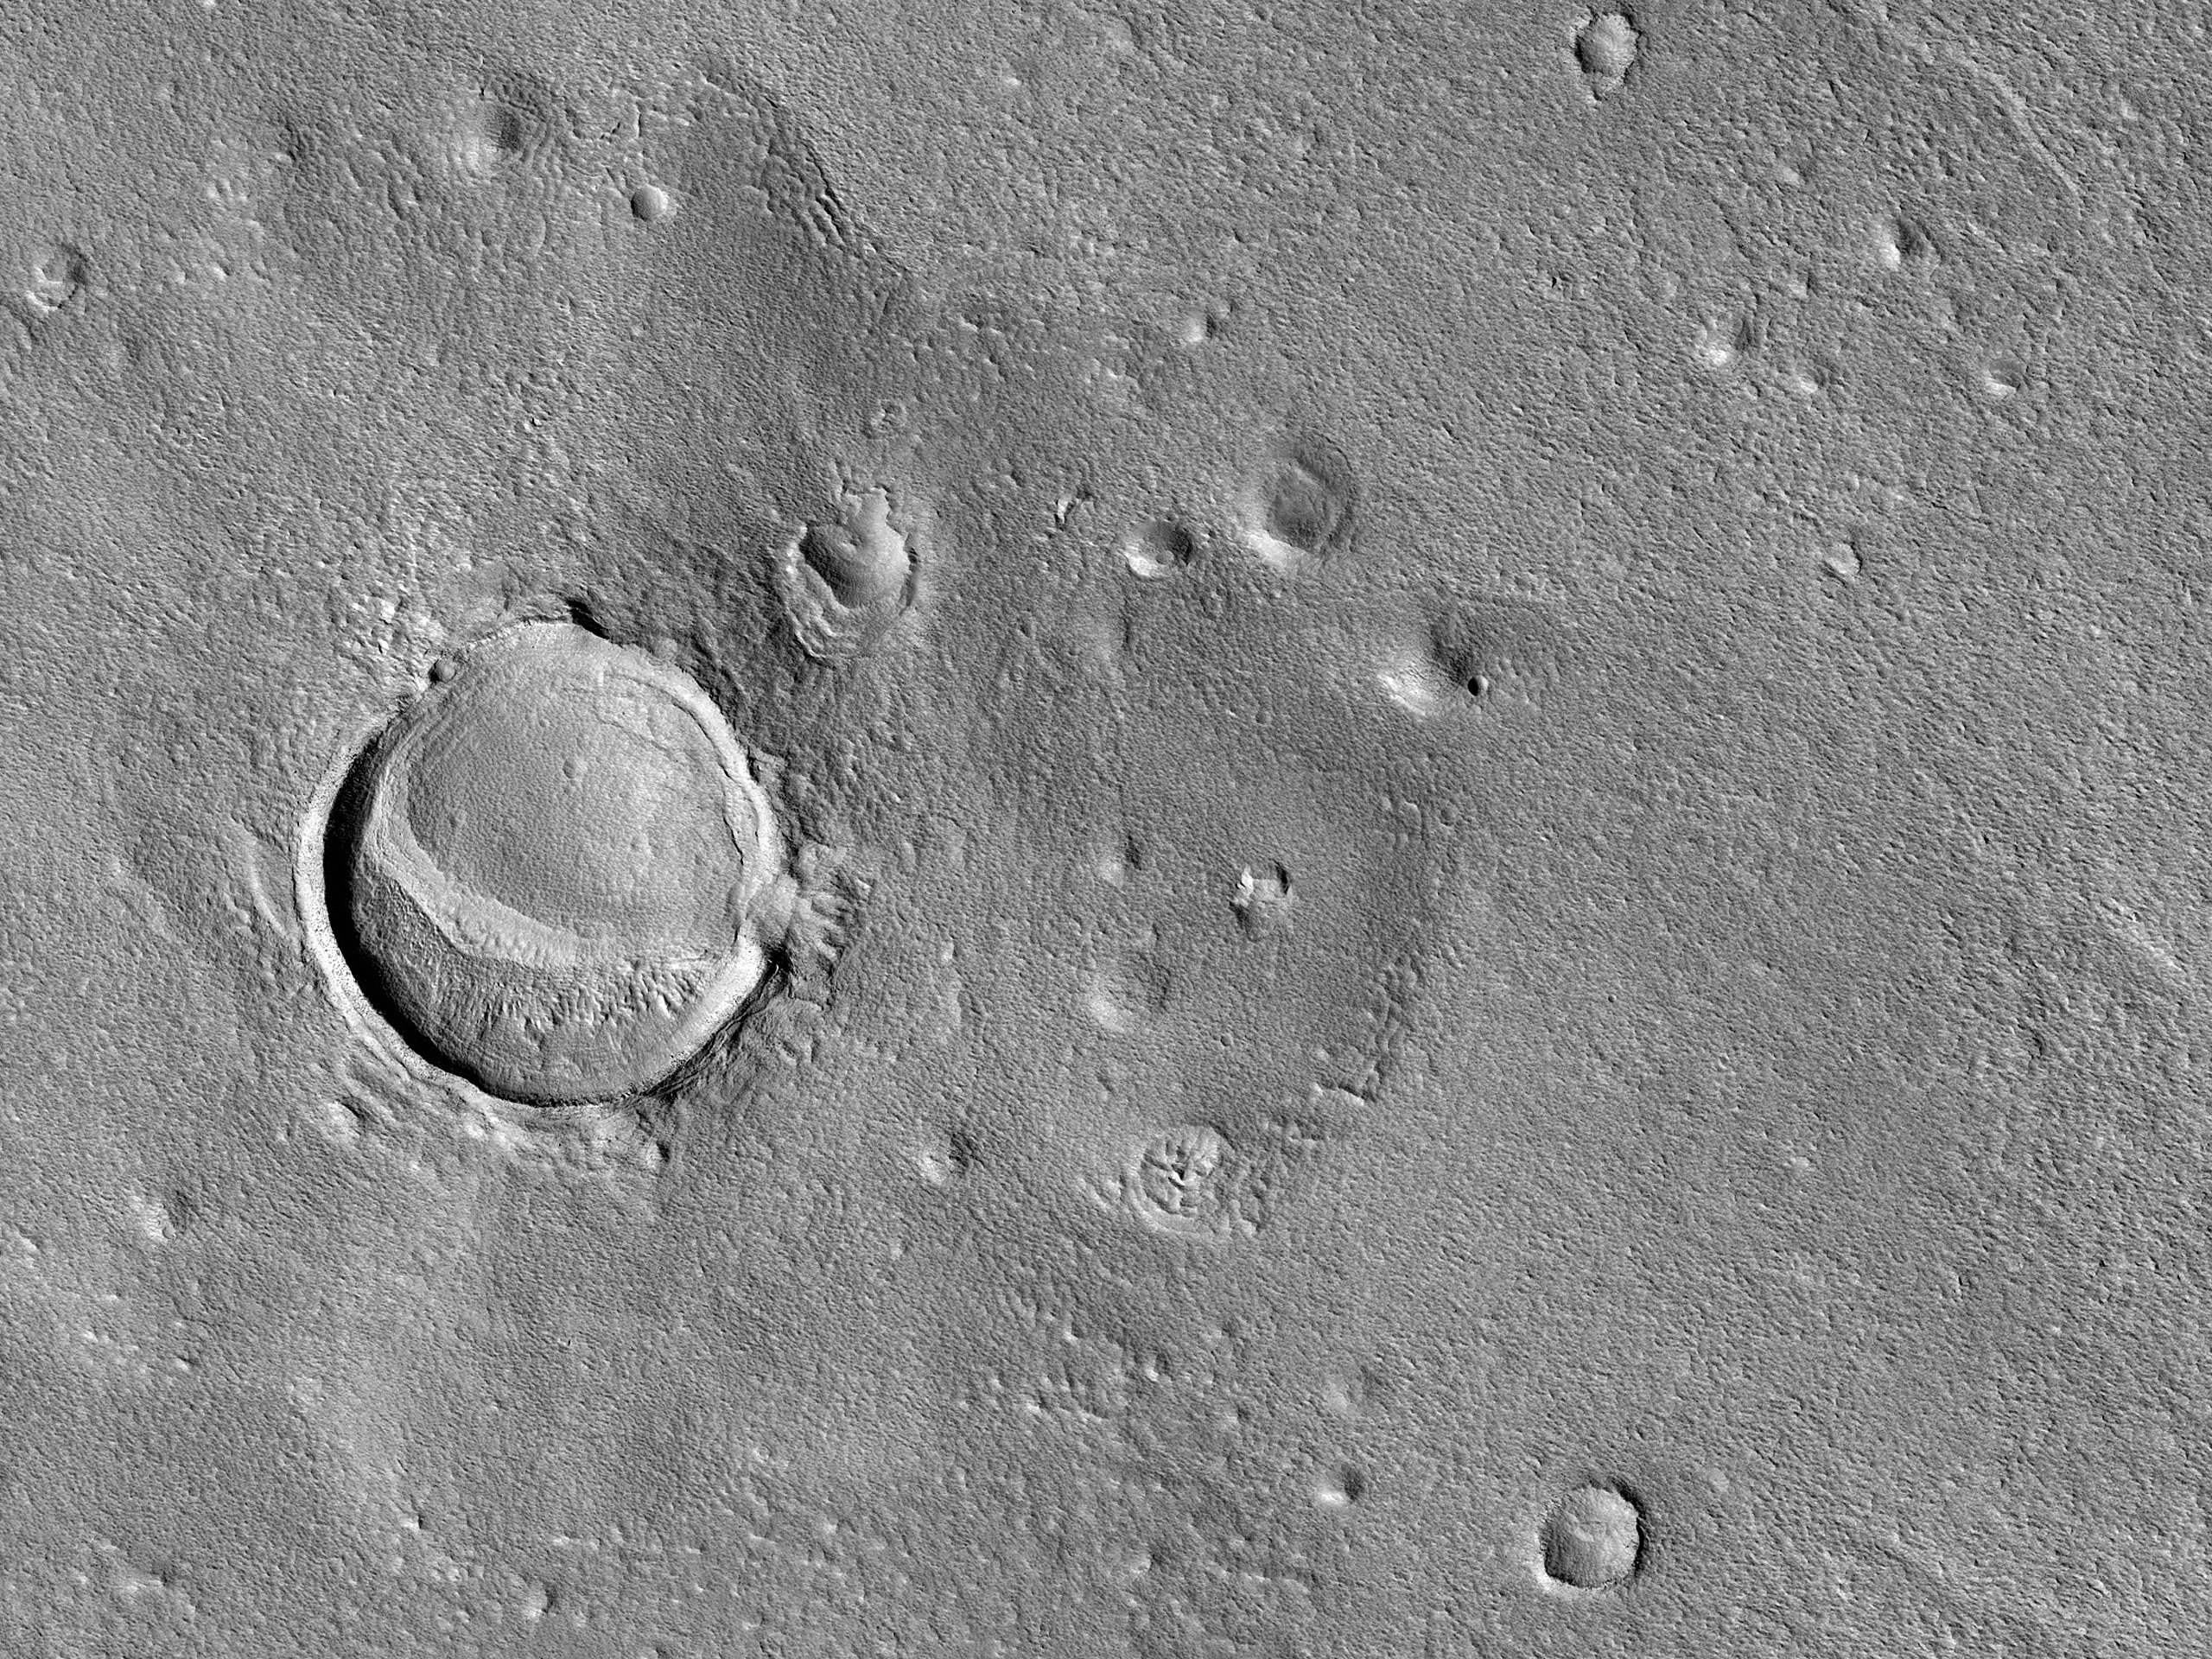 Layered Features of Two Craters